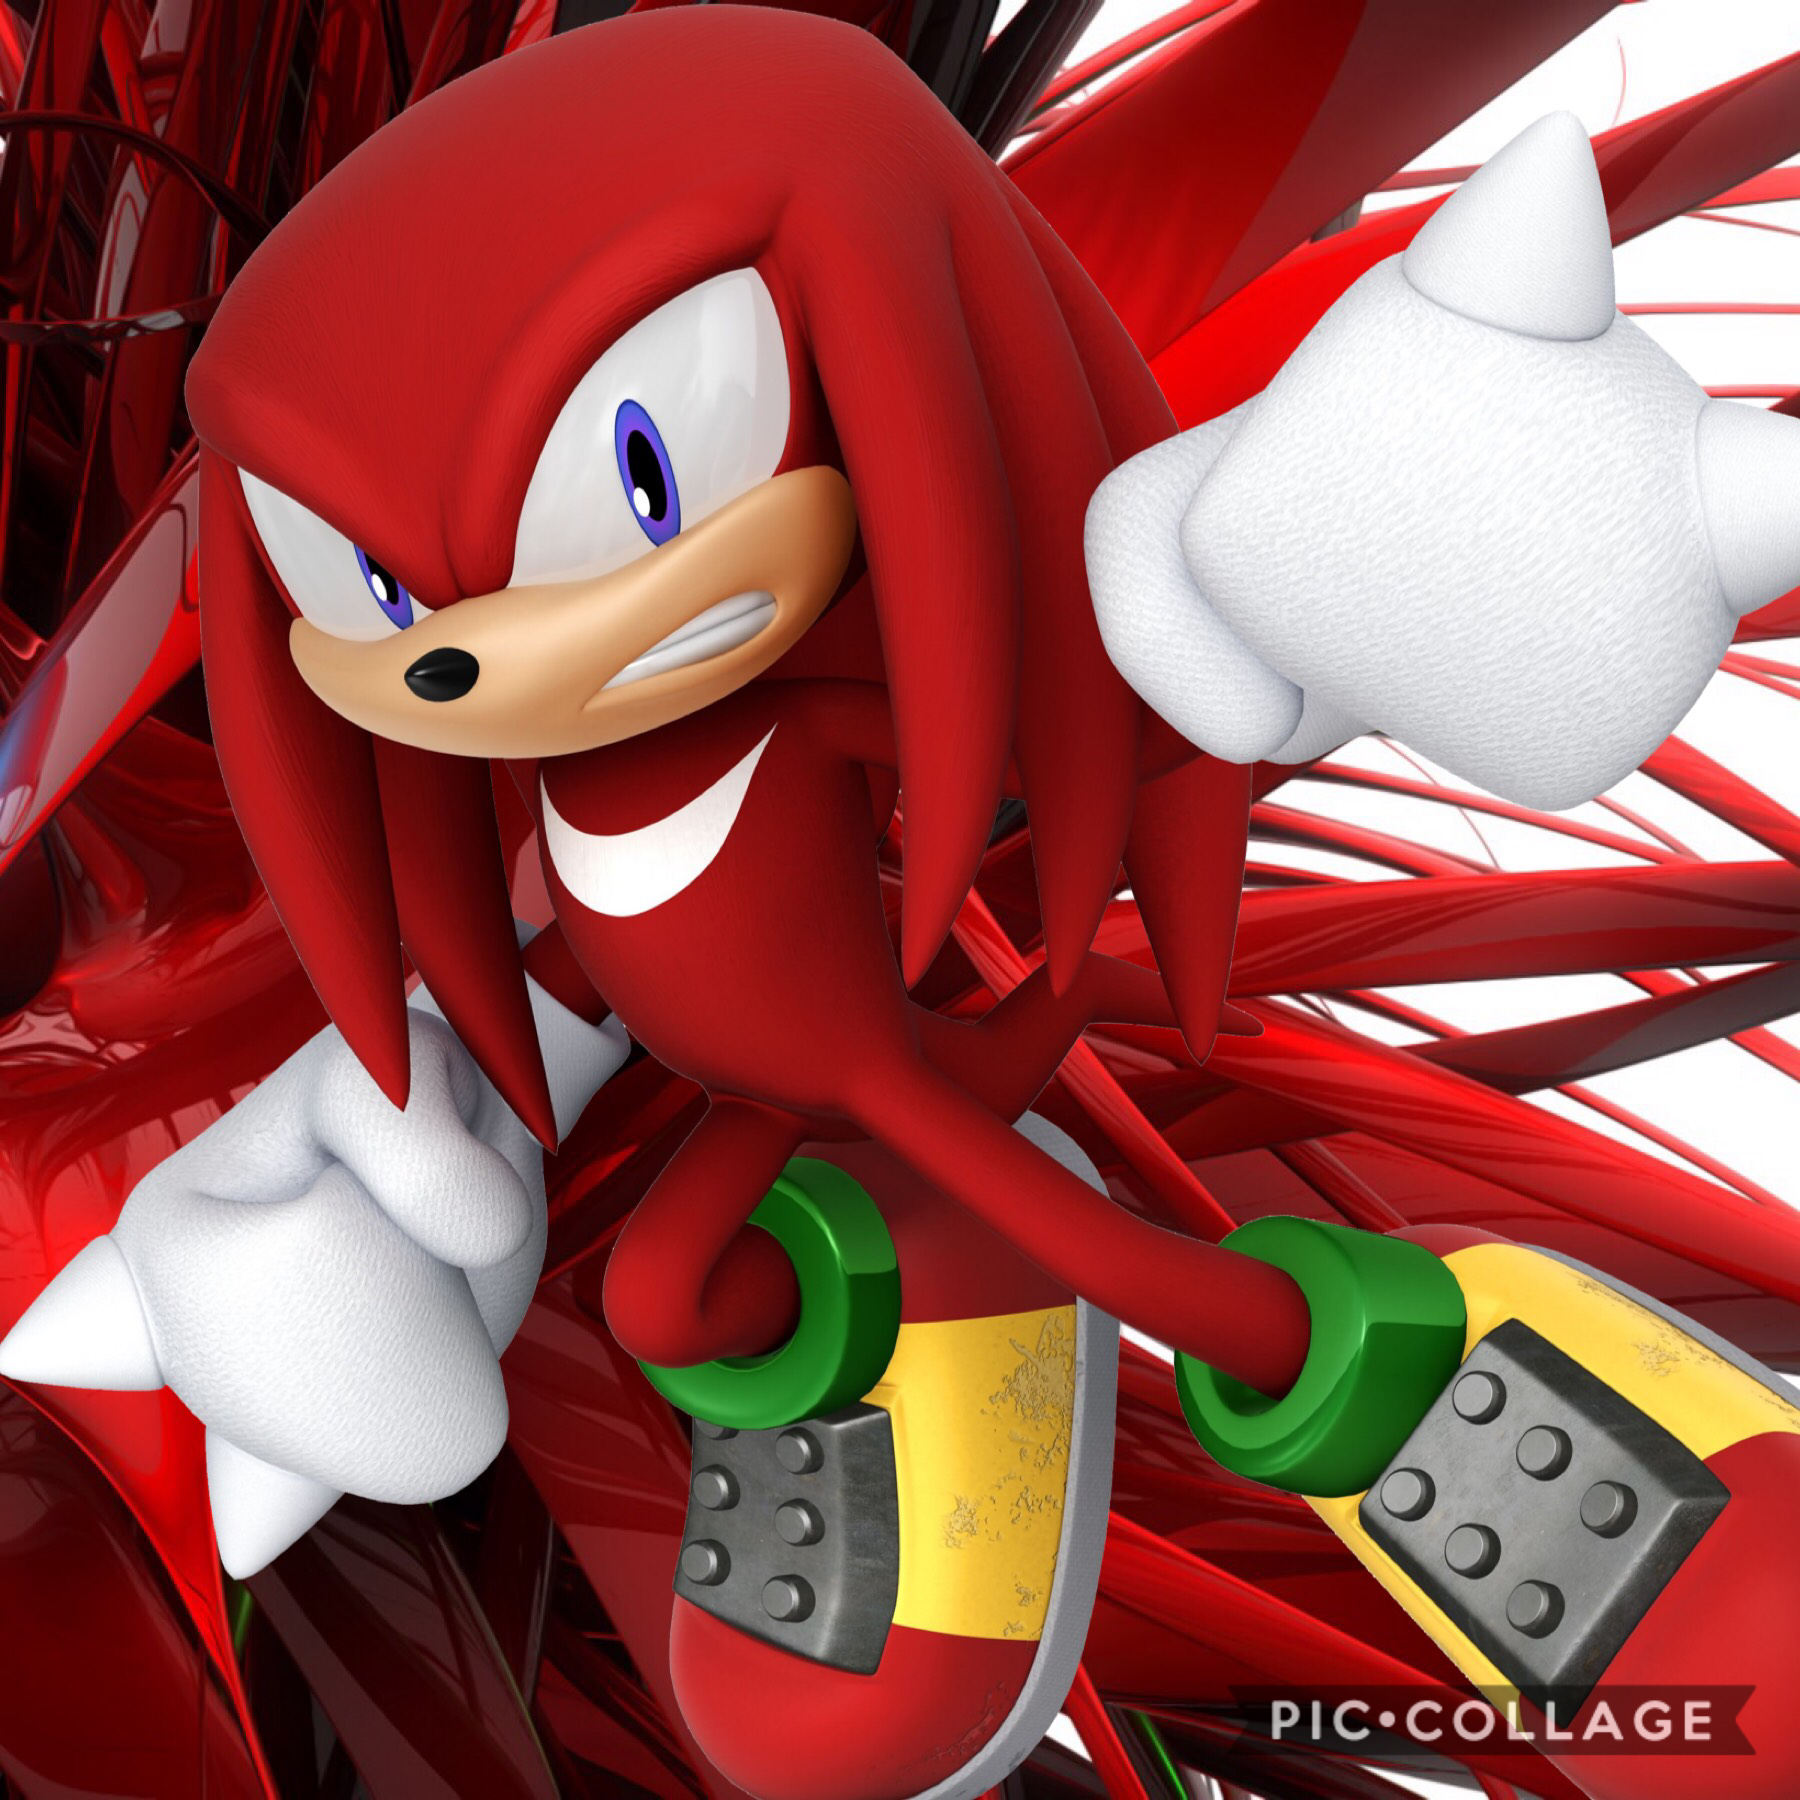 Tap!❤️❤️❤️
Ah knuckles.... the third character 😏 
Known for his temper, which can be lost extremely easily.
Definitely one of my favorites, he’s so strong 🙃😊